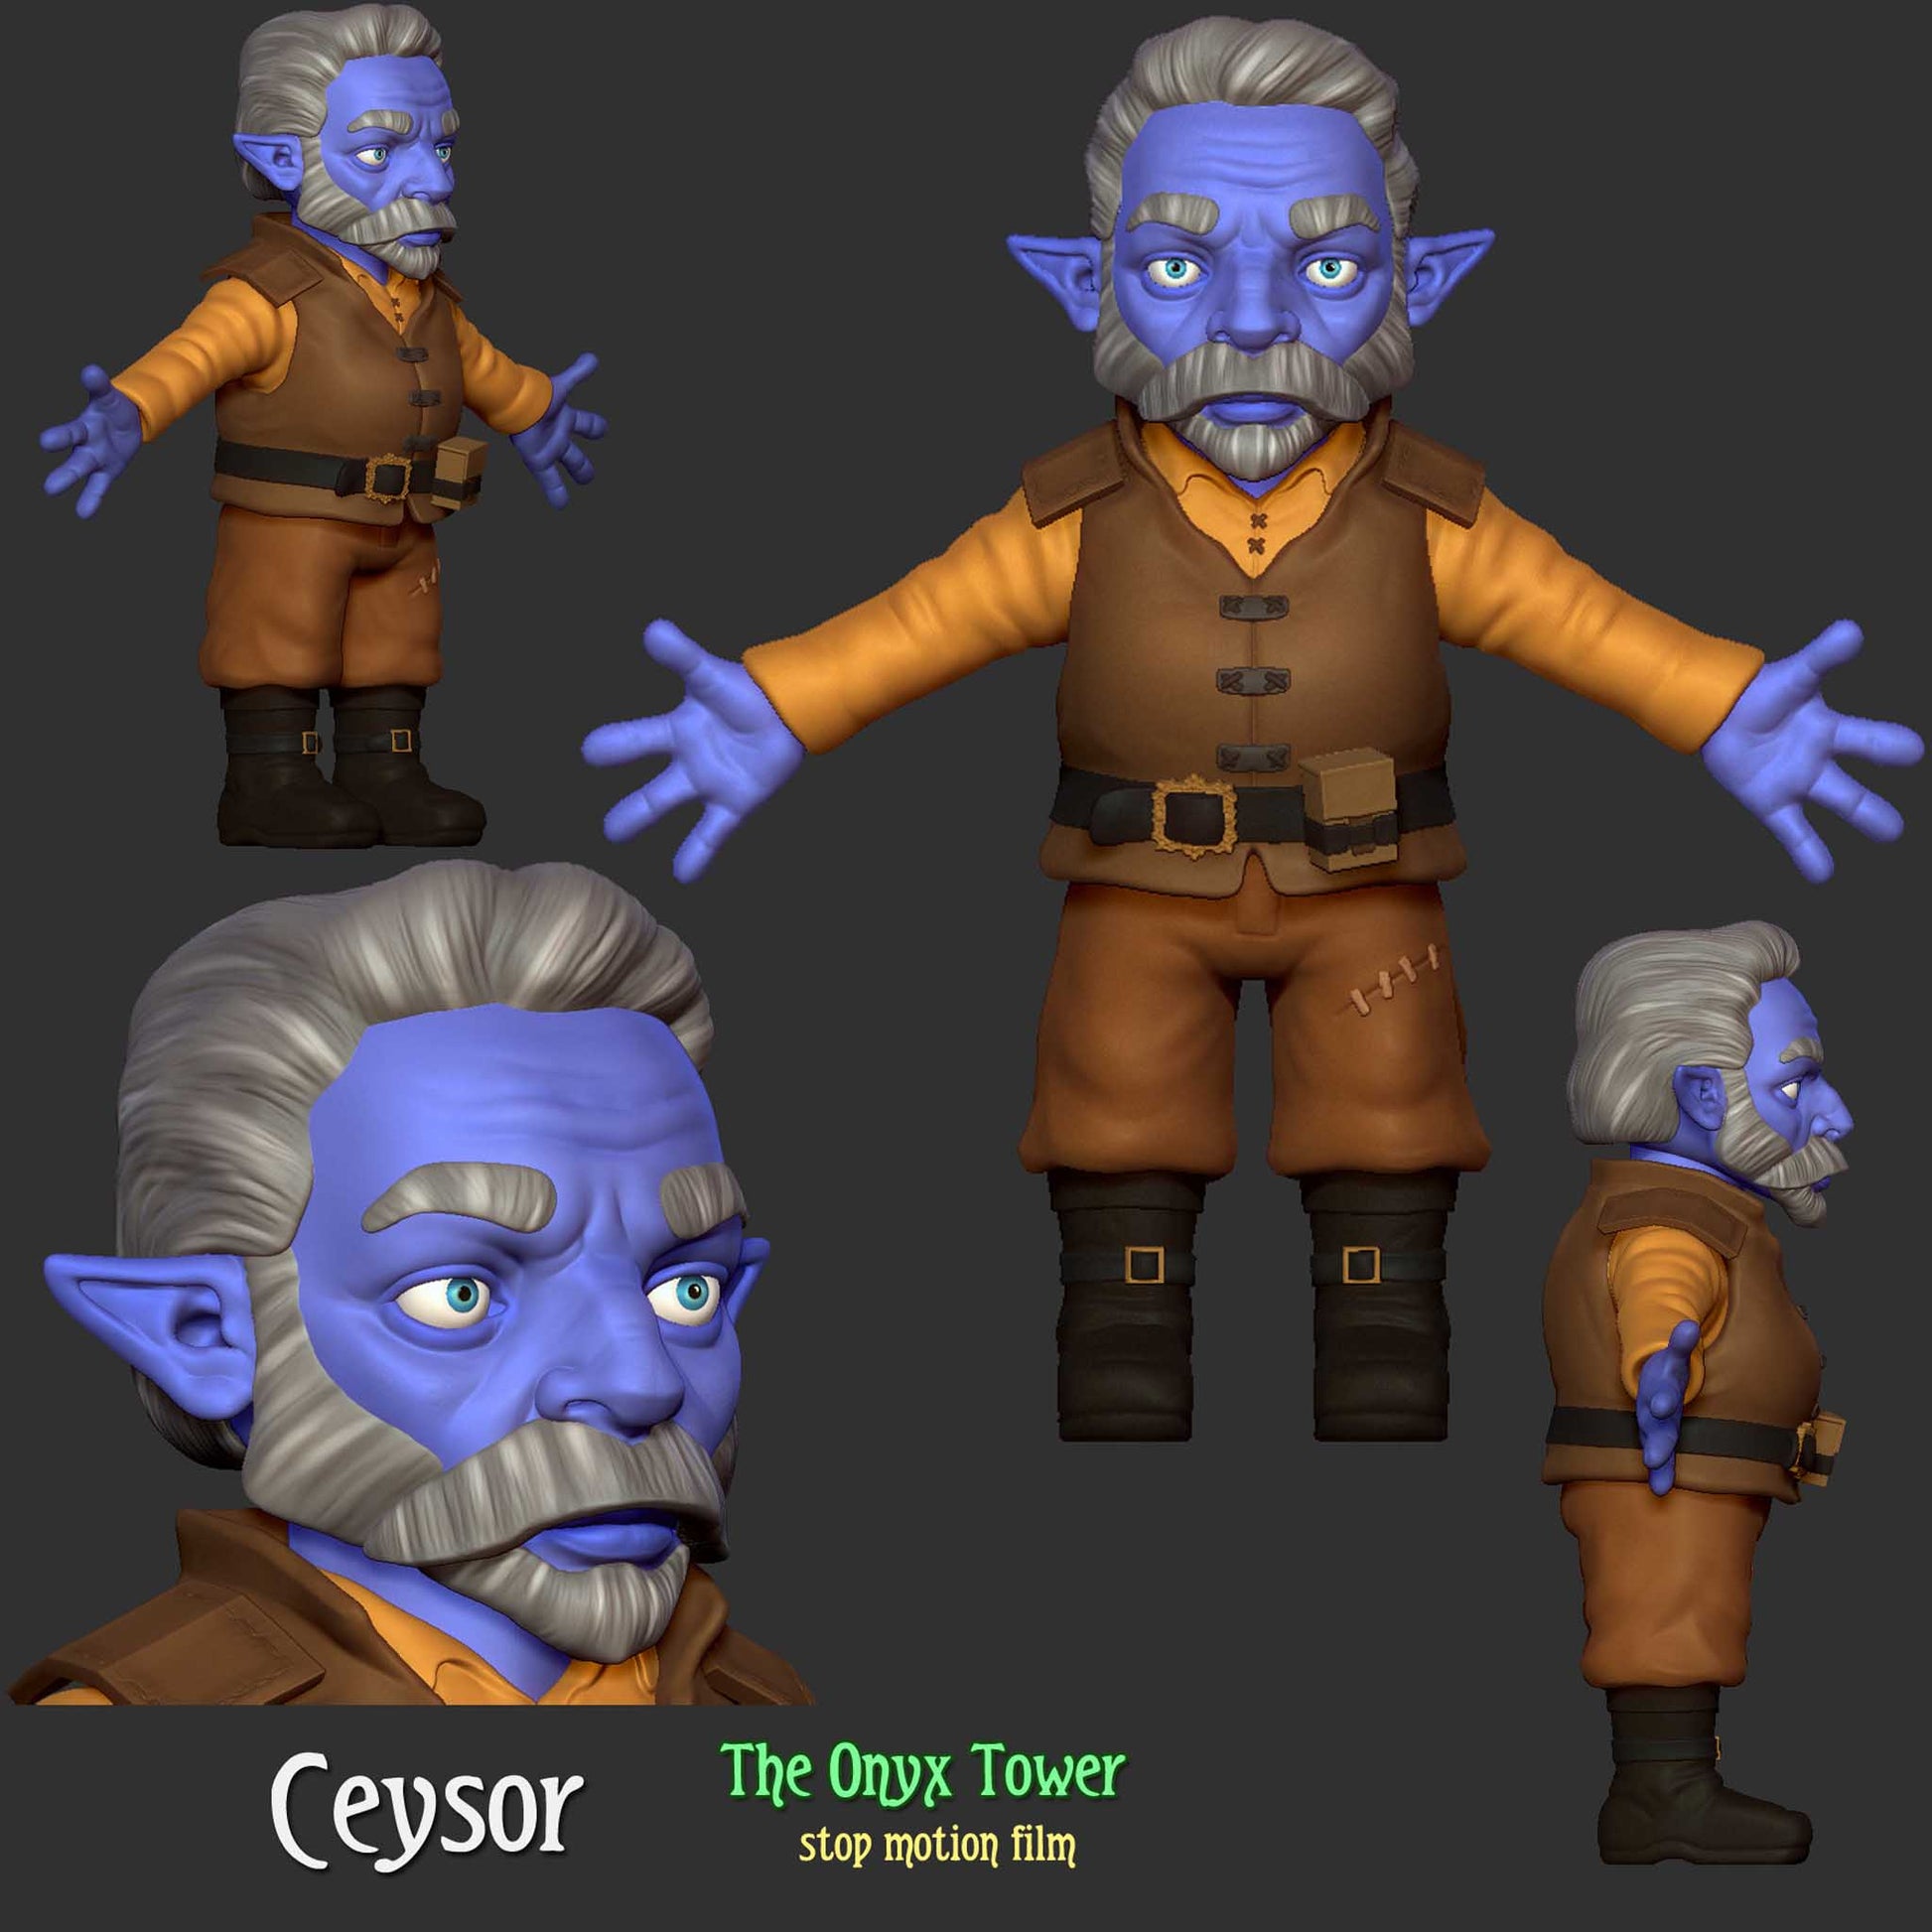 Ceysor, digitally sculpted for the Onyx Tower stop motion film project.